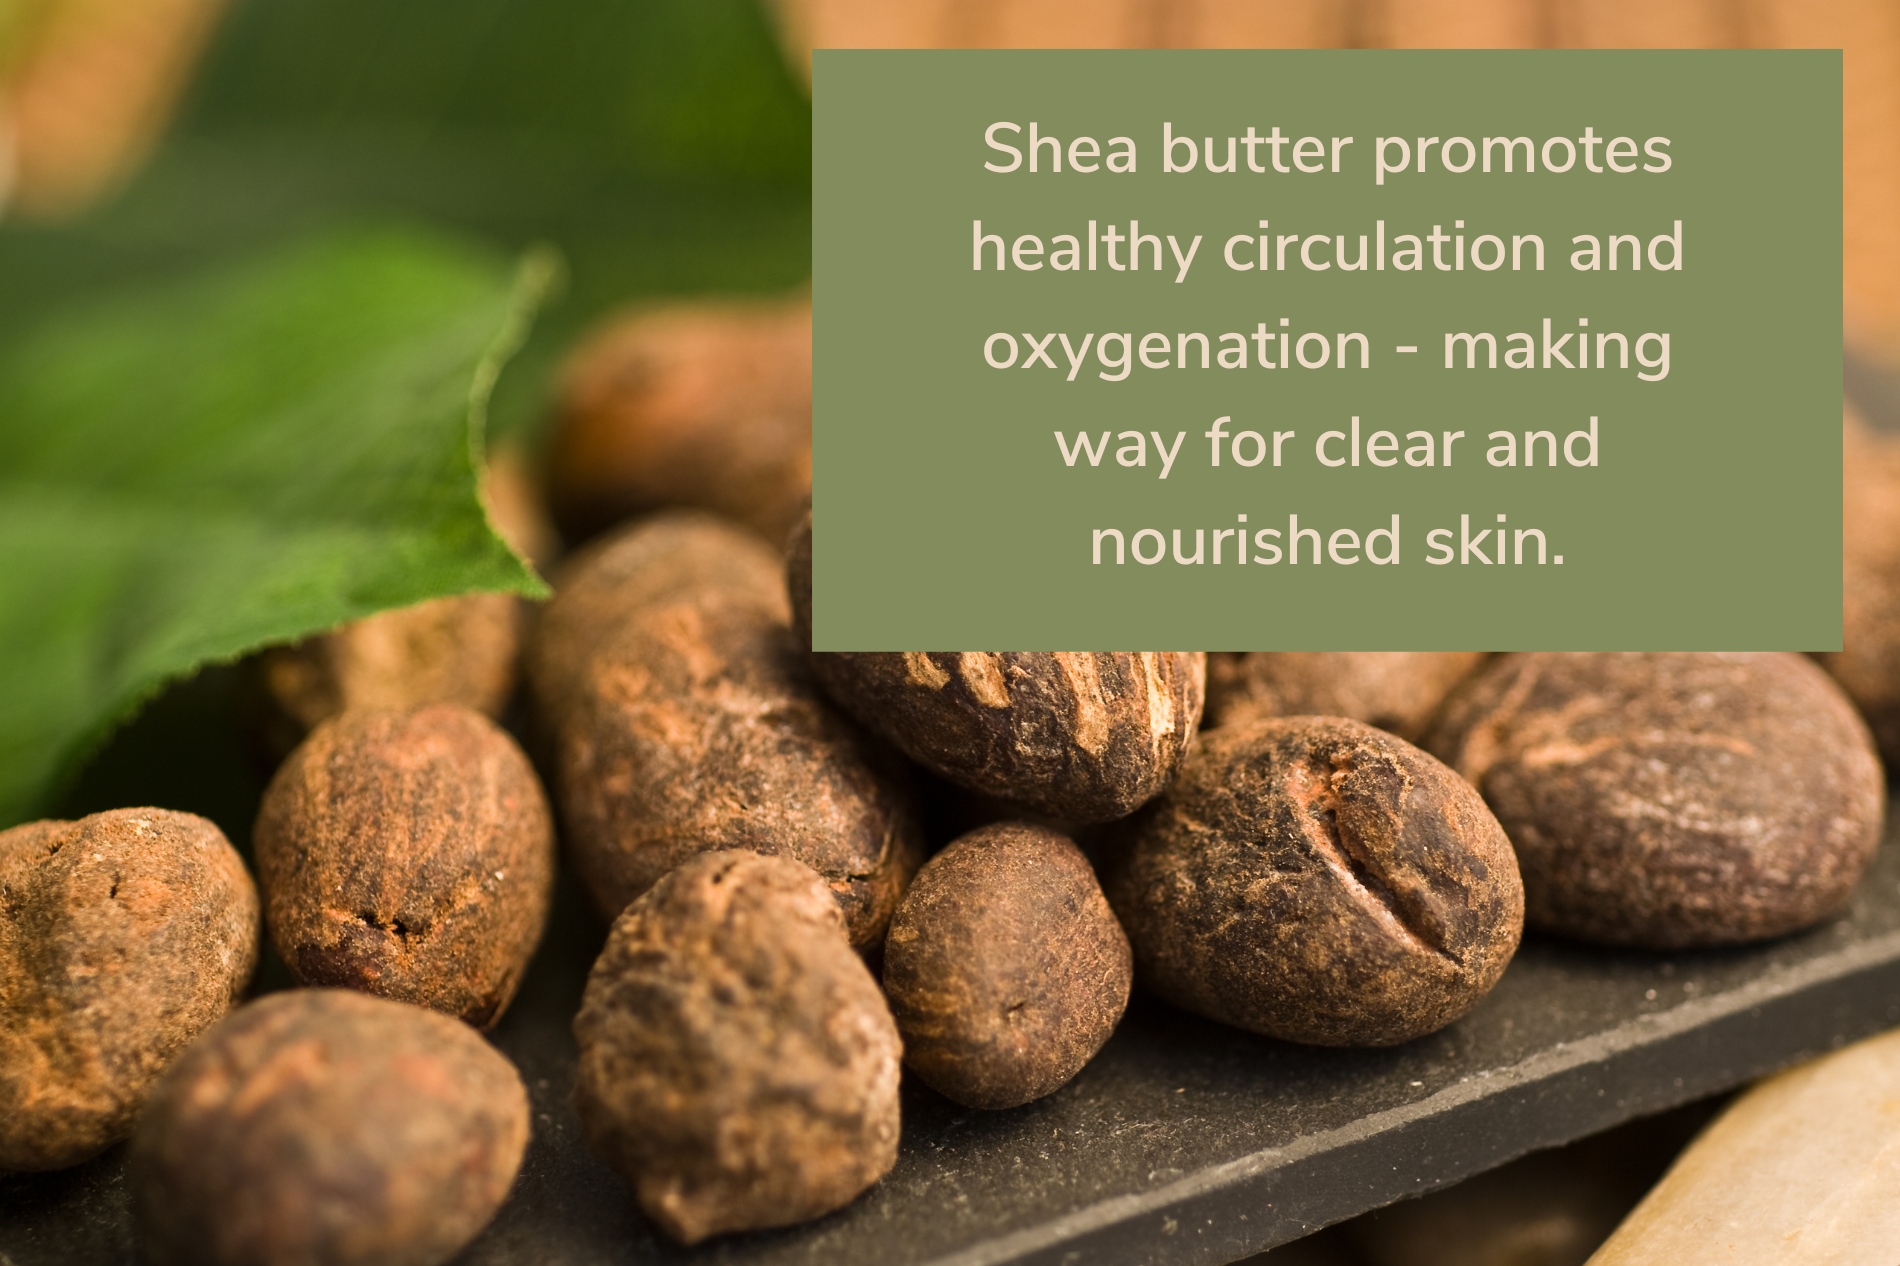 Shea butter promotes healthy circulation and oxygenation - making way for clear and nourished skin. - anato Life Skincare